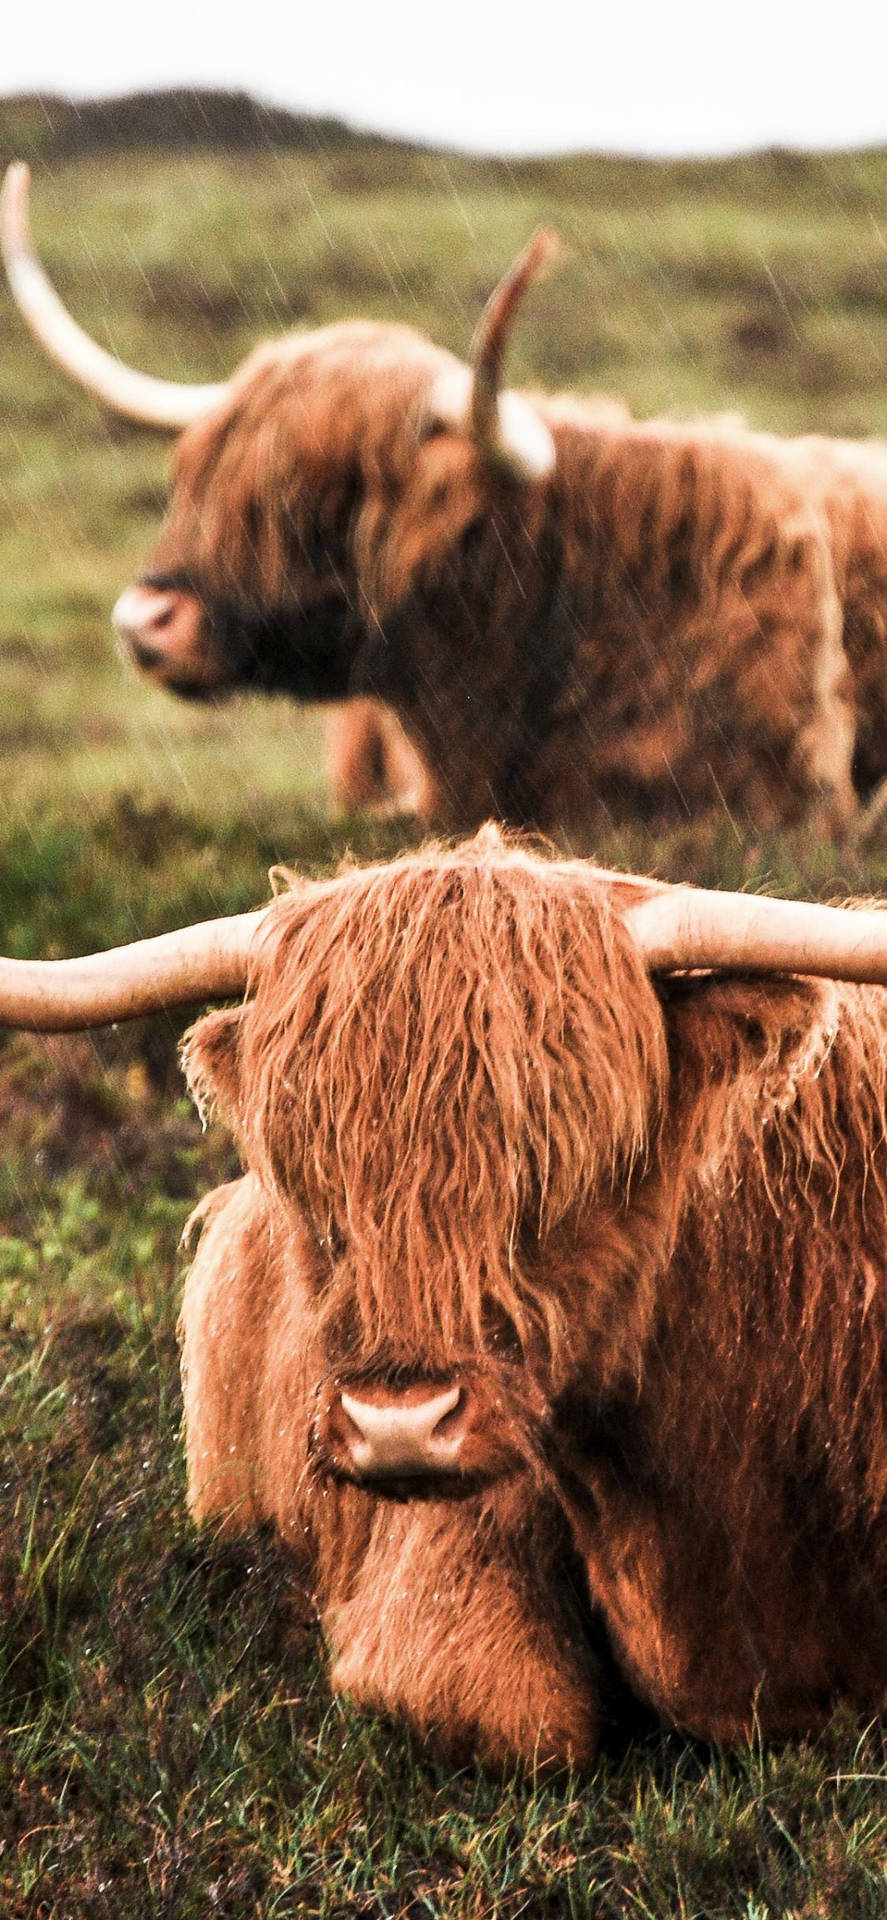 Highland Cow Lying In Grass Wallpaper